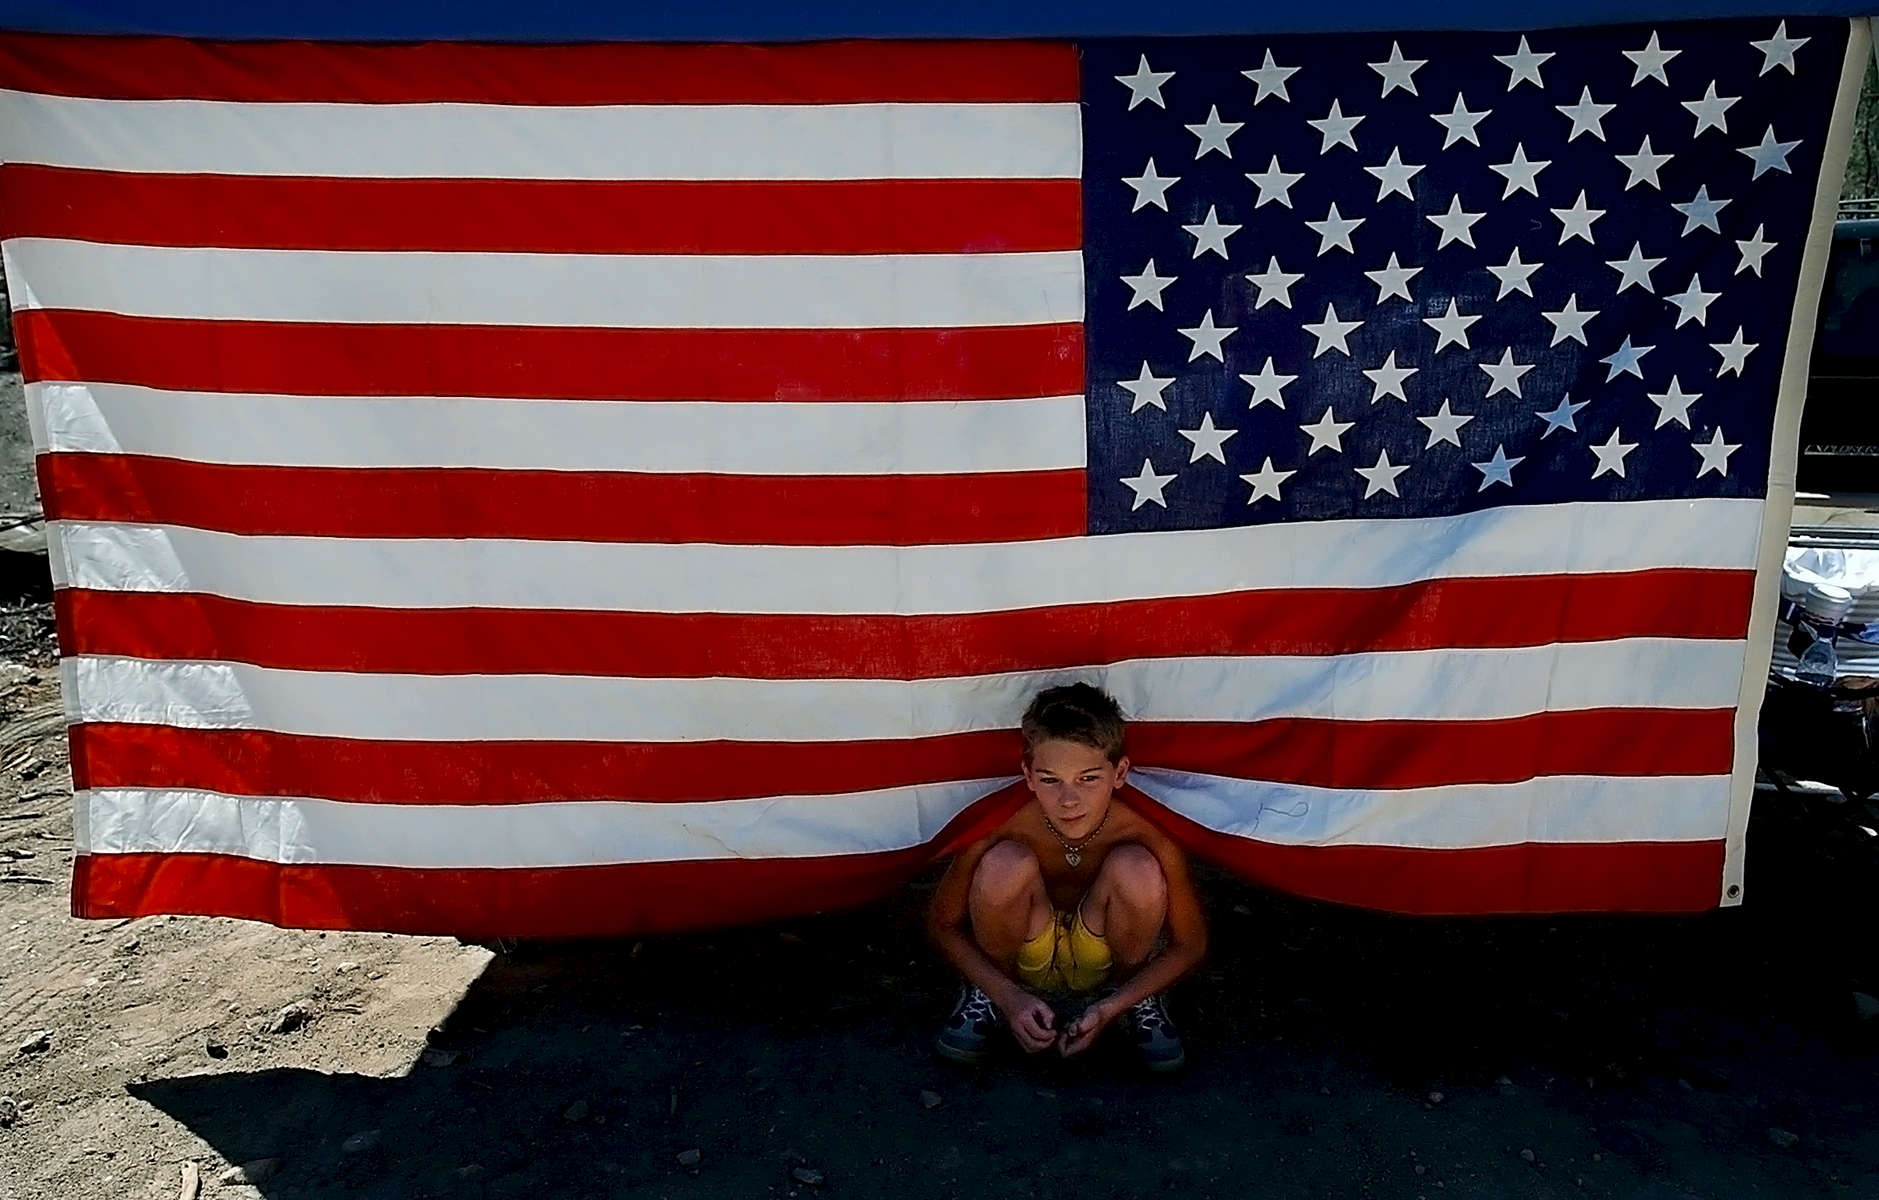 Jacob Burcham, 10, finds shade under an Americanflag that hangs from a Pop-Up shelter in the dirt and ash where his grandparents house was on Hook CreekRoad in Cedar Glen, Calif. The house was destroyed in the San Bernardino Old Fire last year. His grandparents, Janet and Jim Burcham, bought the house one week before the Old Fire burned through Cedar Glen. The Burchams were participating the Cedar Glen block partya year after the fire destroyed hundreds of homes. (The Press-Enterprise/Mark Zaleski)